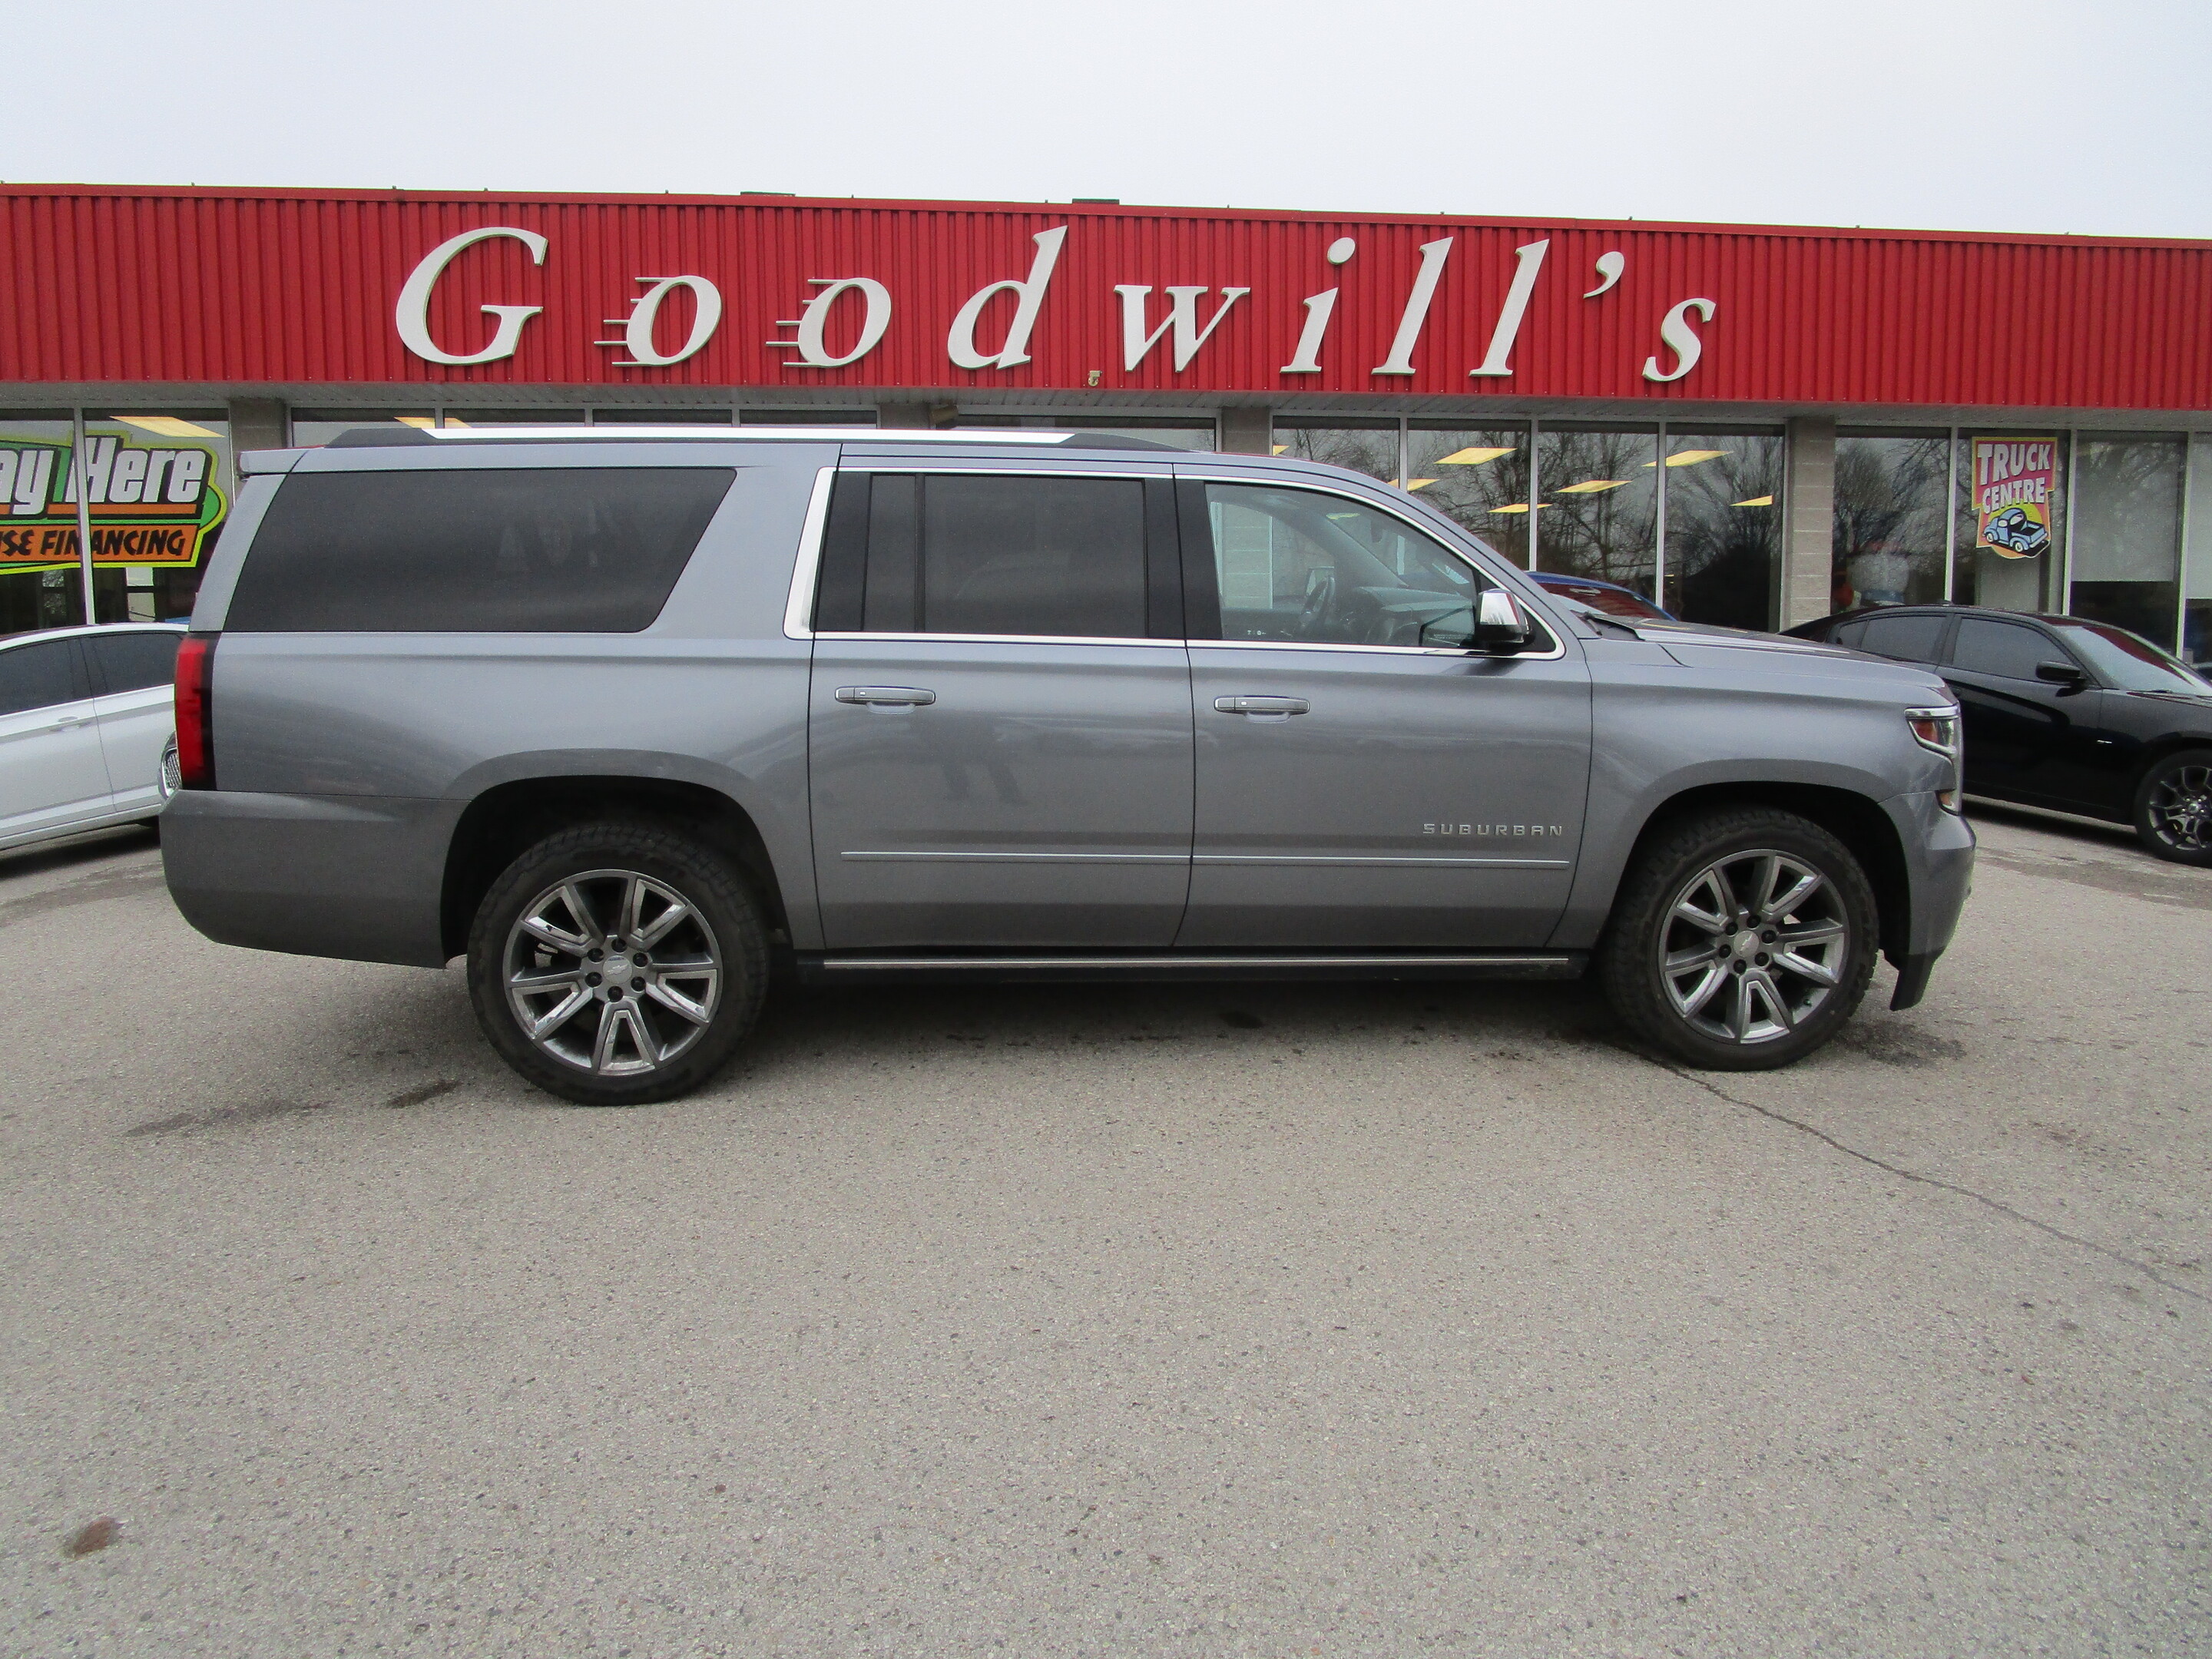 2018 Chevrolet Suburban CLEAN CARFAX, NAV, HEATED/COOLED LEATHER, SUNROOF!